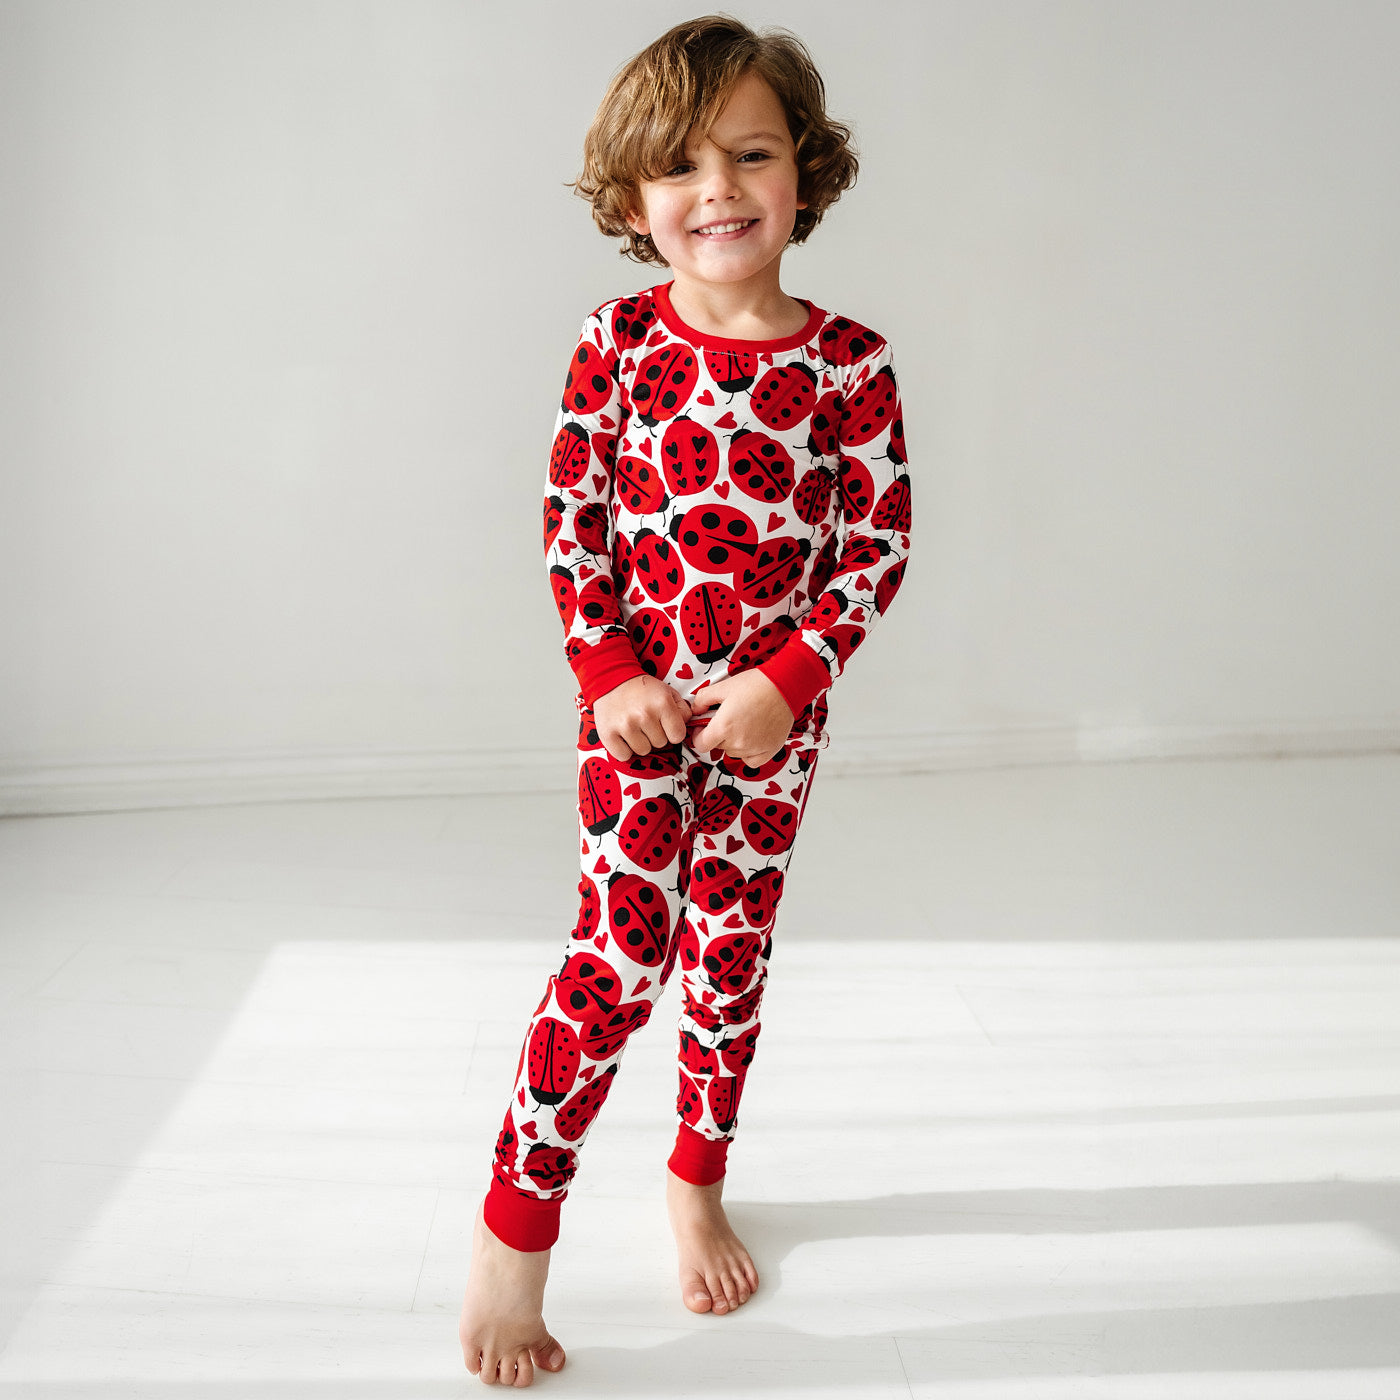 Alternate image of a child wearing a Love Bug printed two-piece pajama set